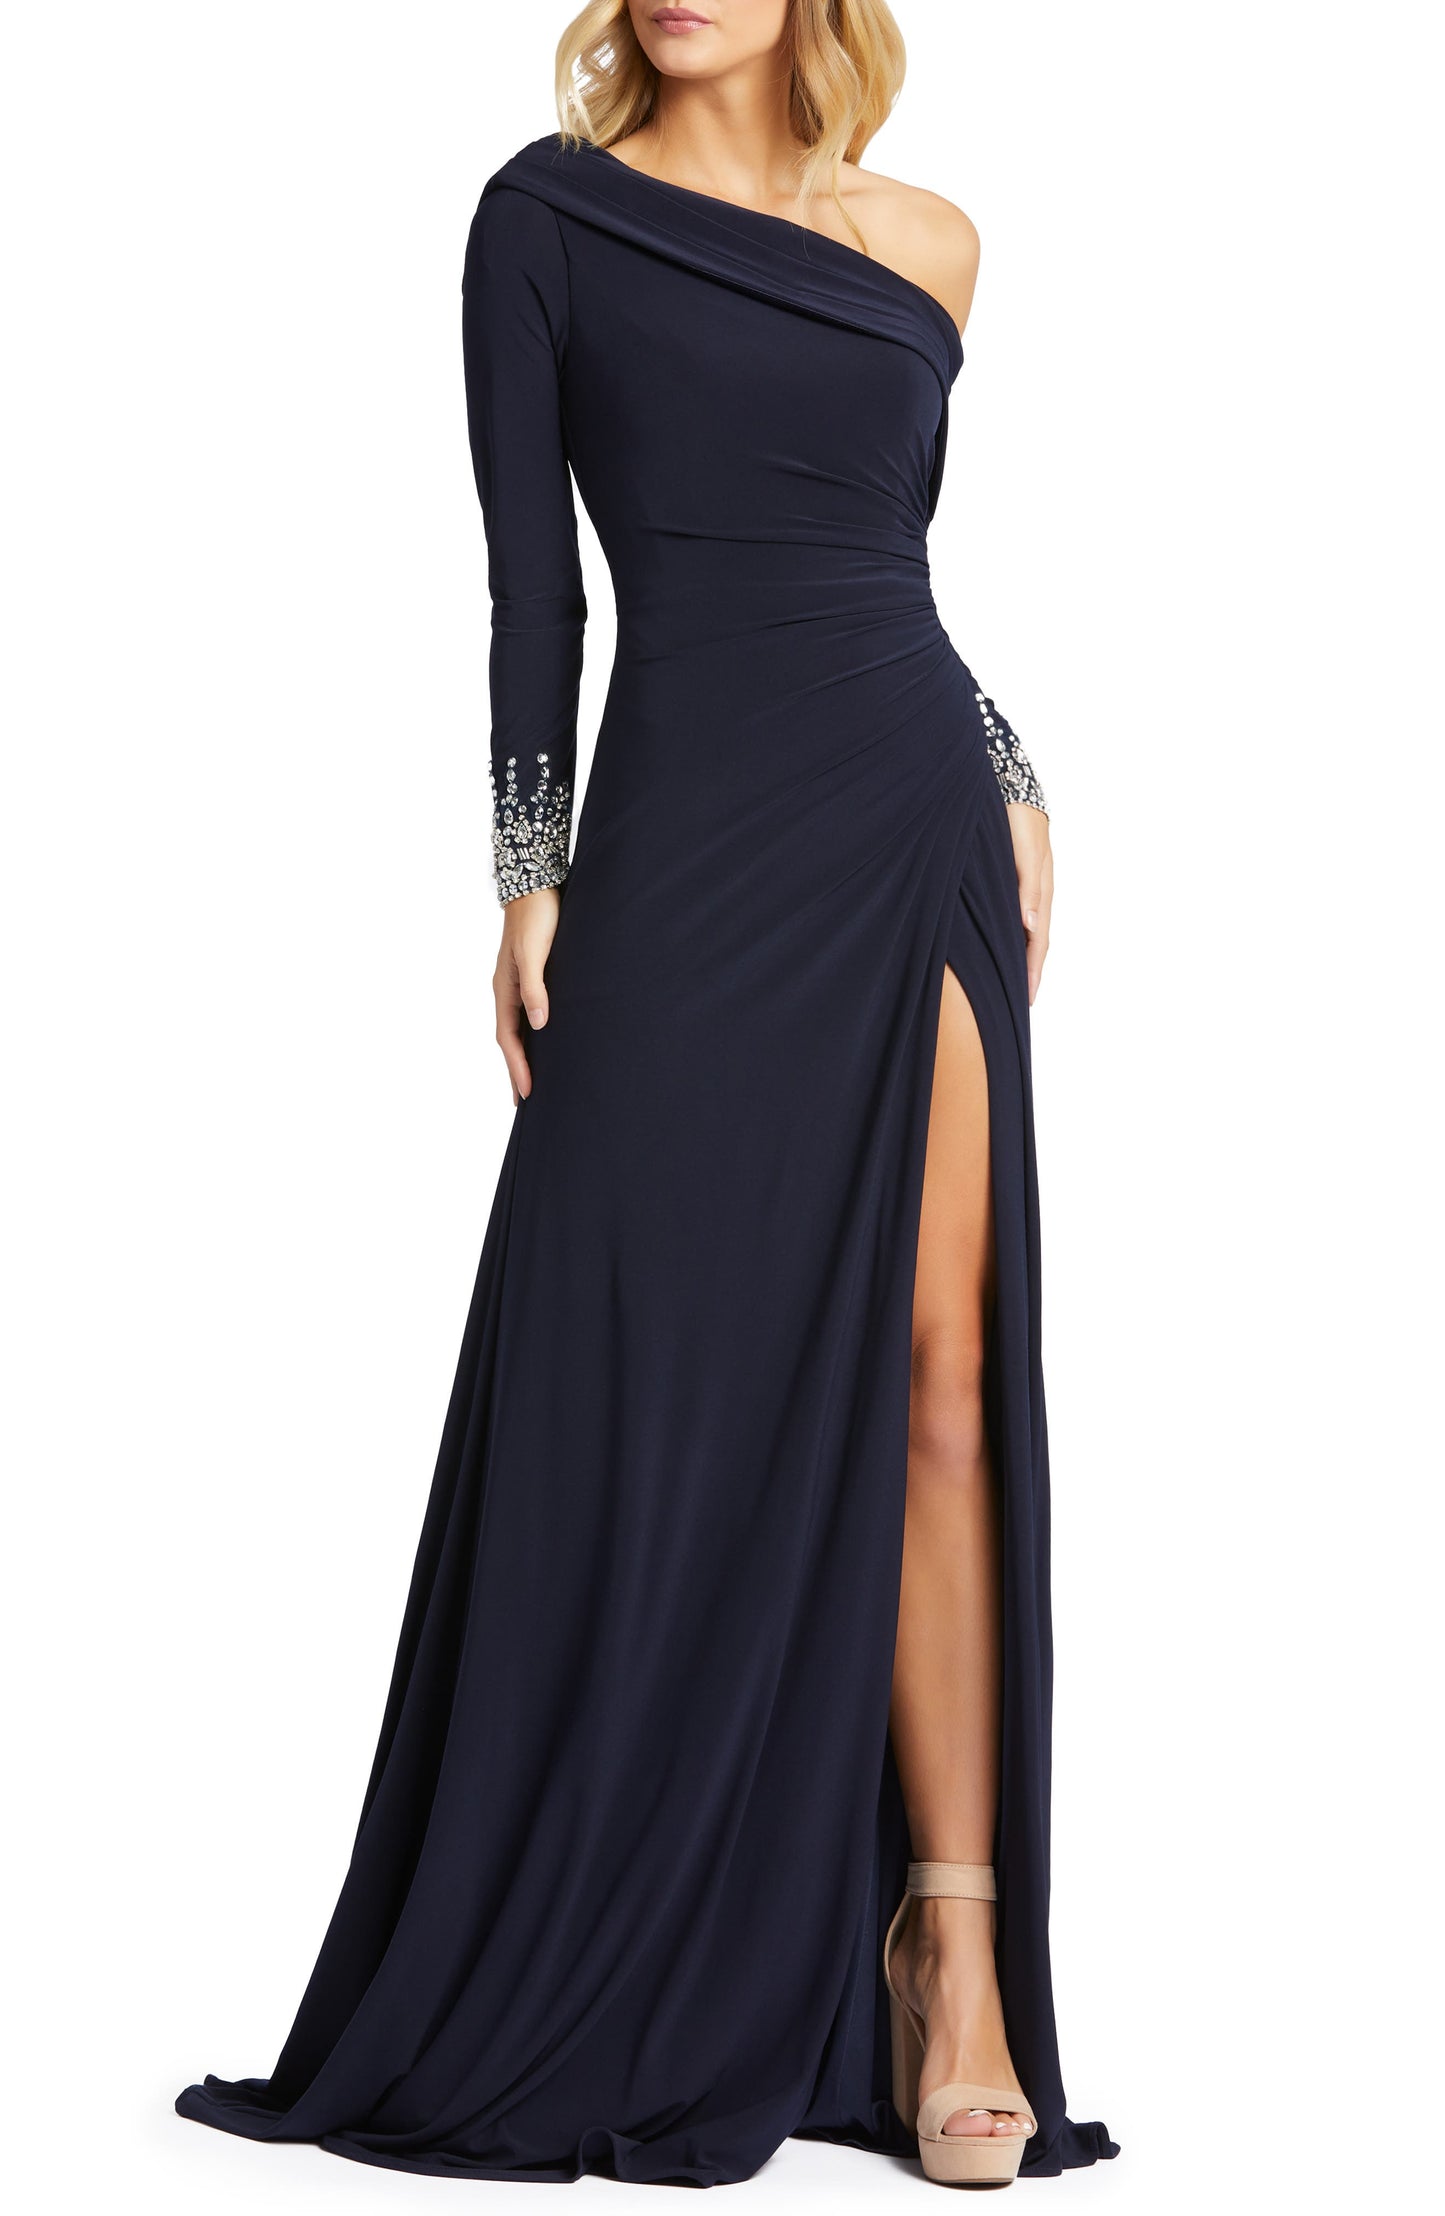 Jersey Gown dress with an attractive design, size 16